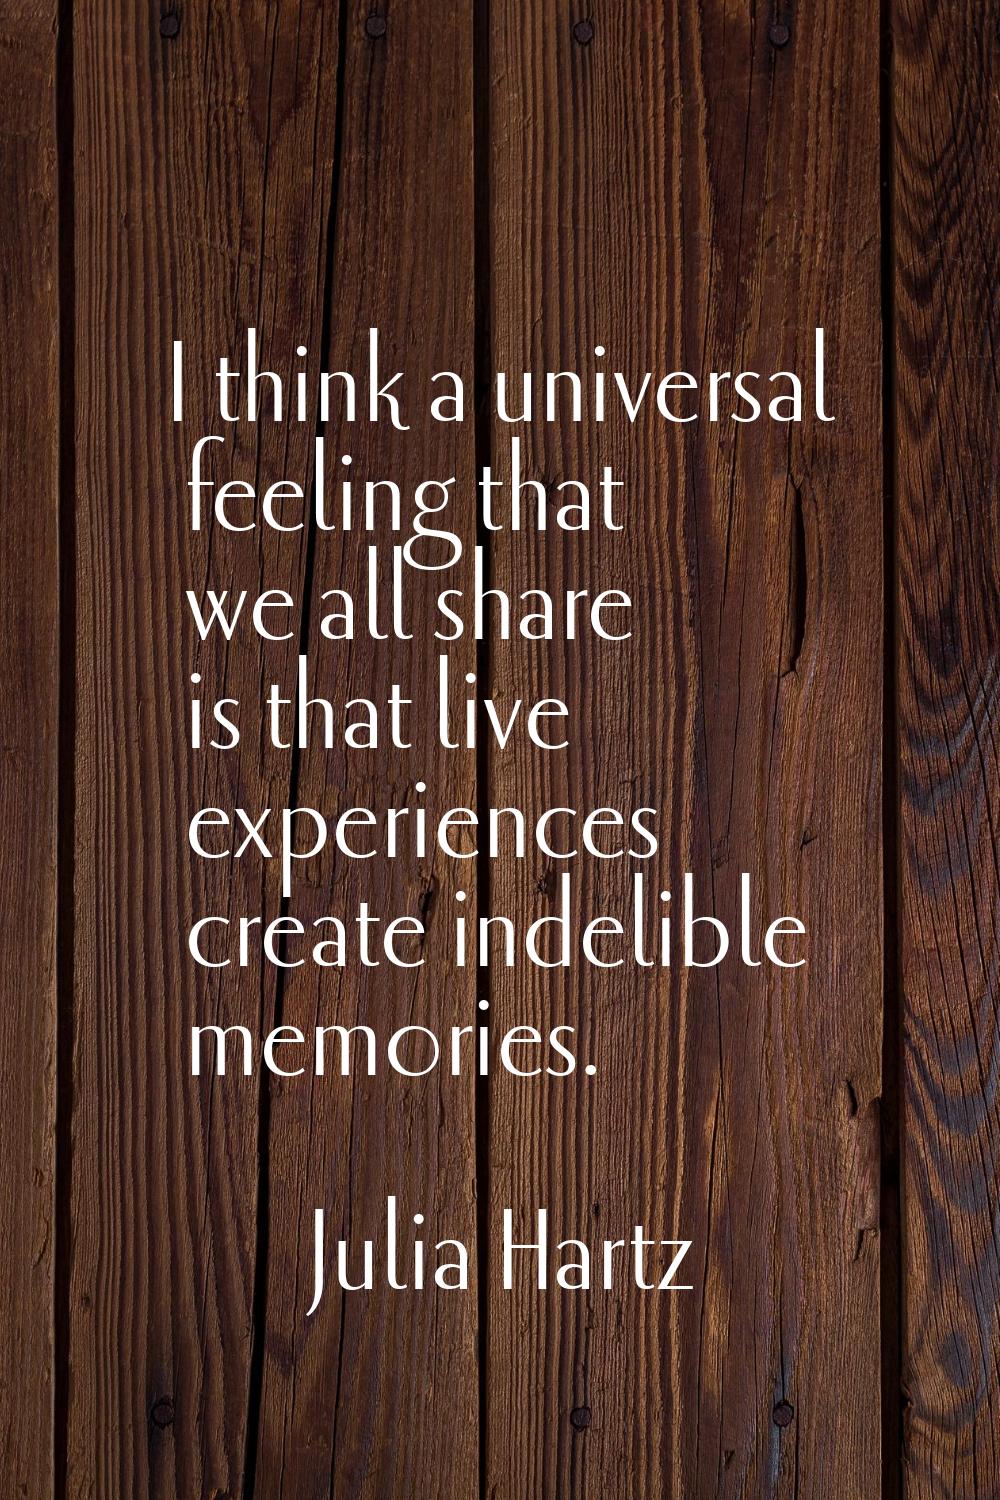 I think a universal feeling that we all share is that live experiences create indelible memories.